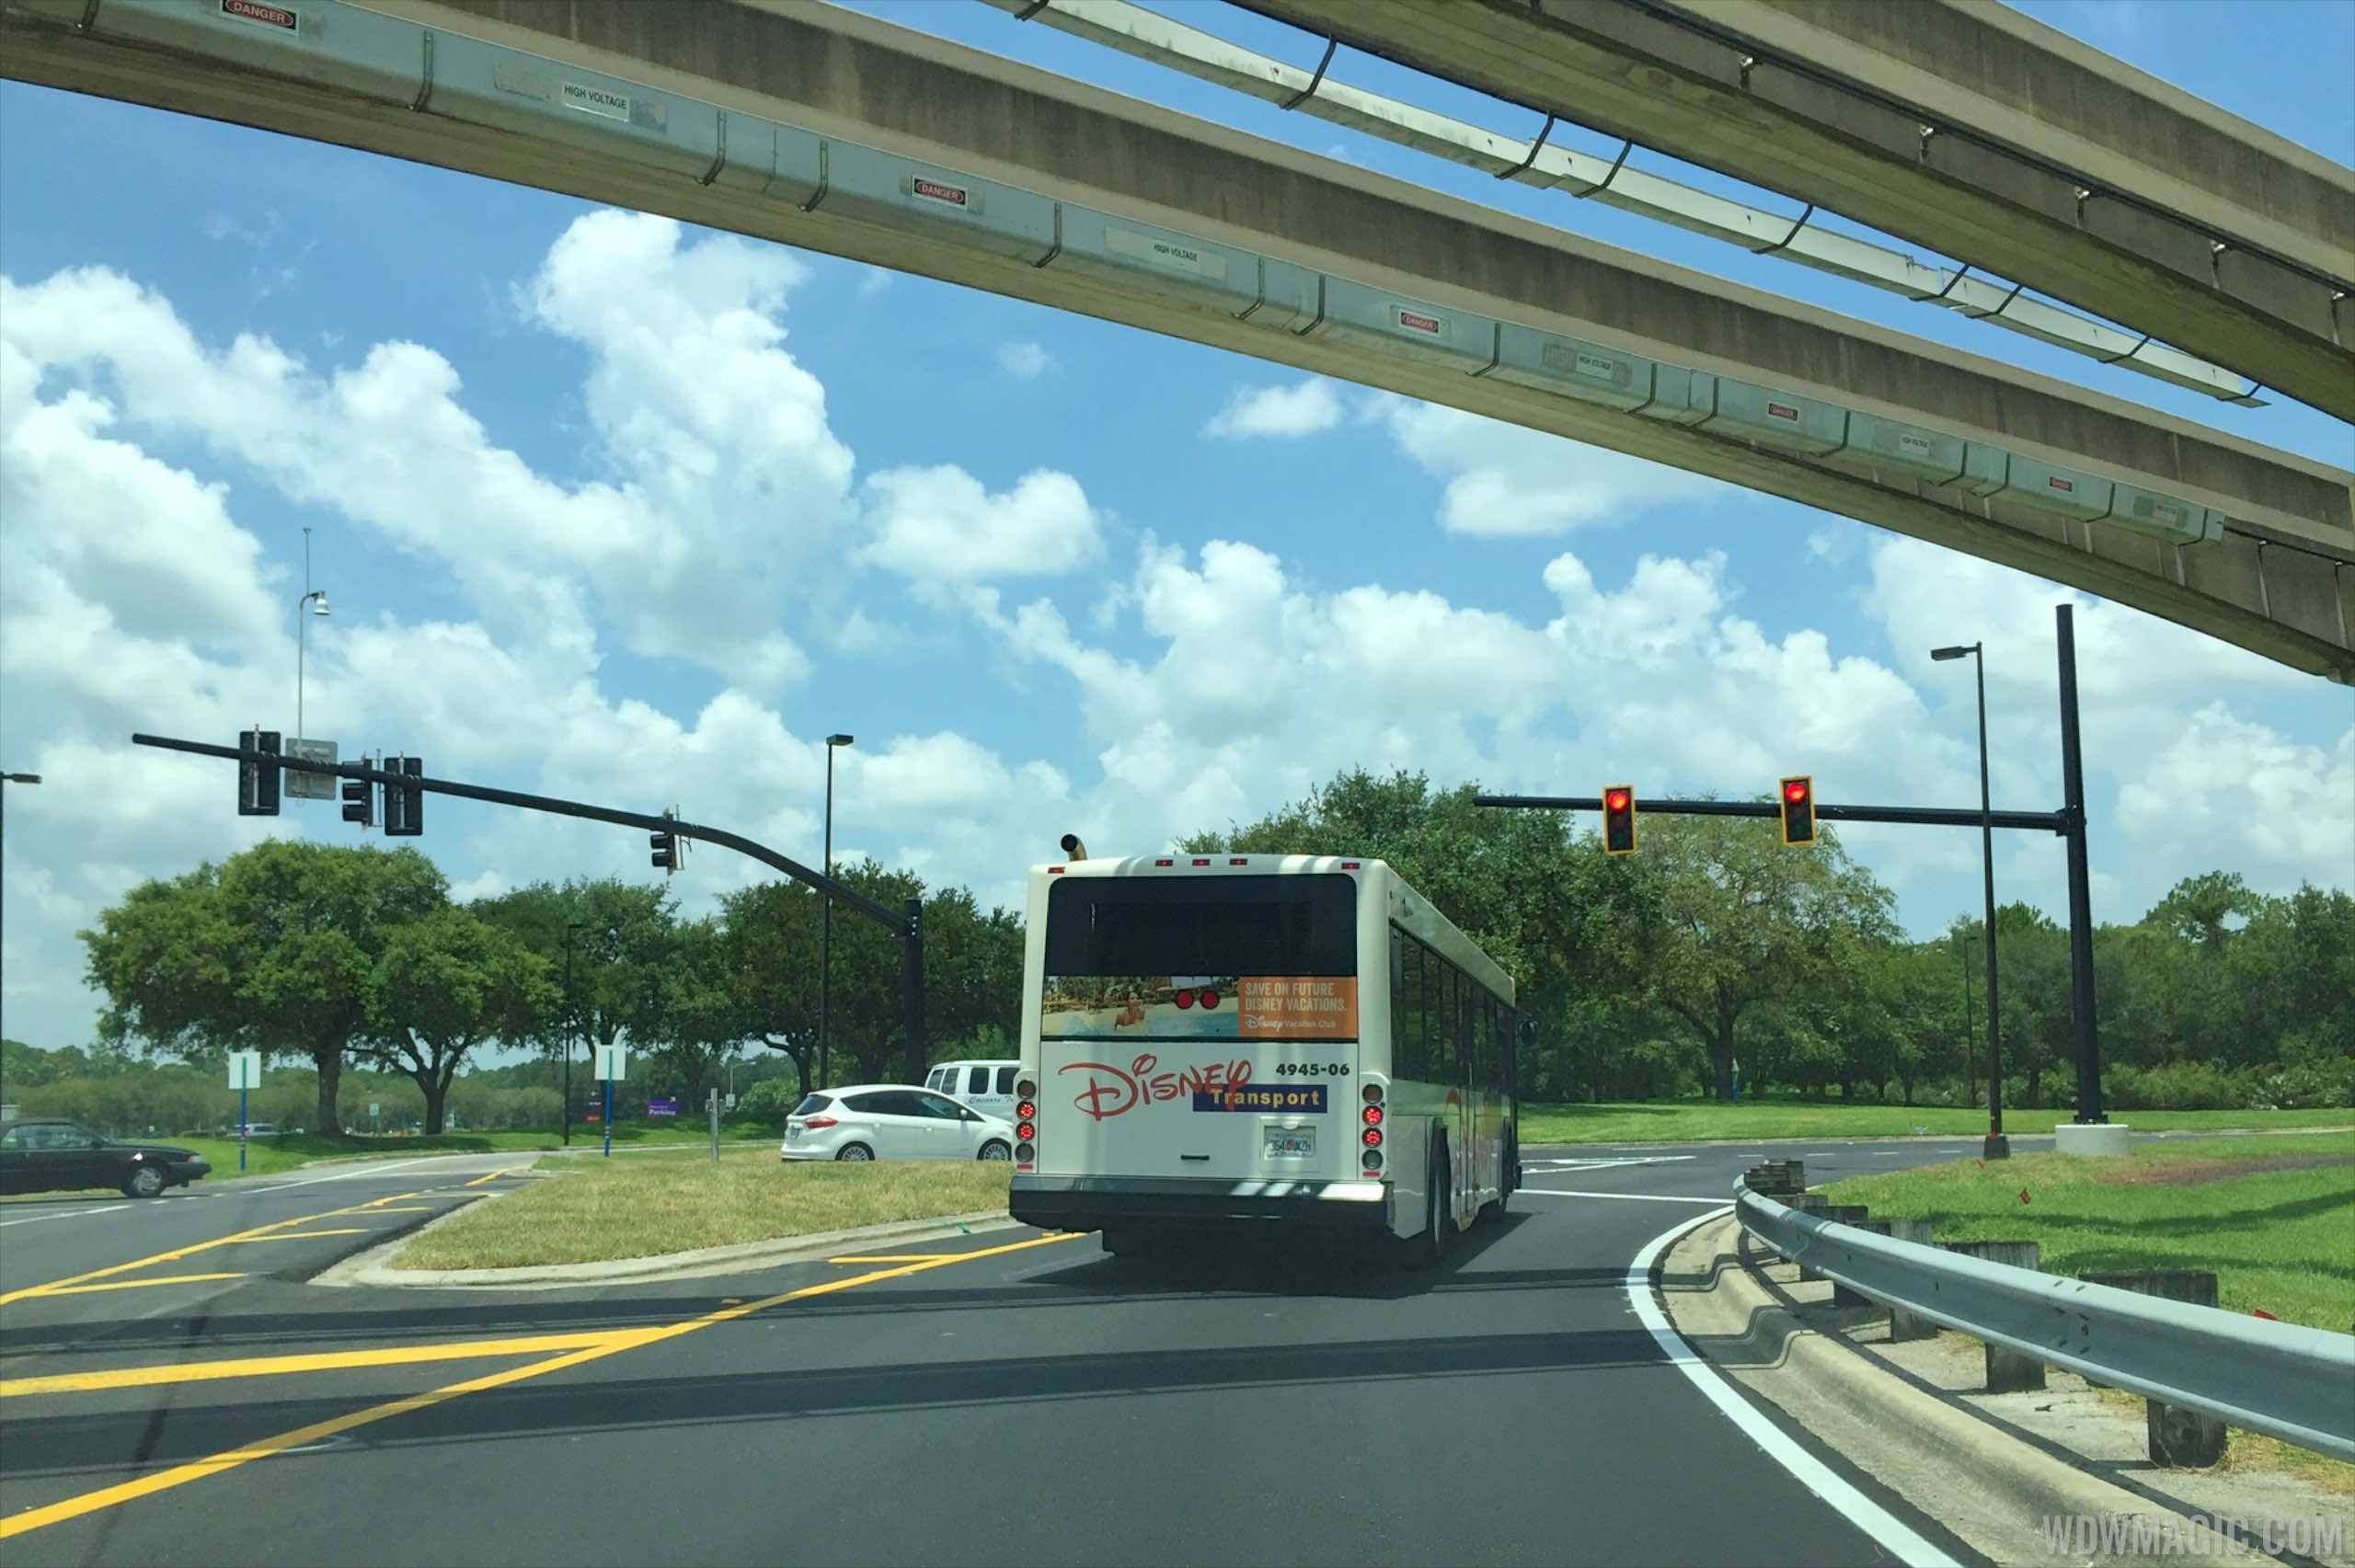 New traffic lights just north of the Magic Kingdom parking plaza at the TTC are now operational